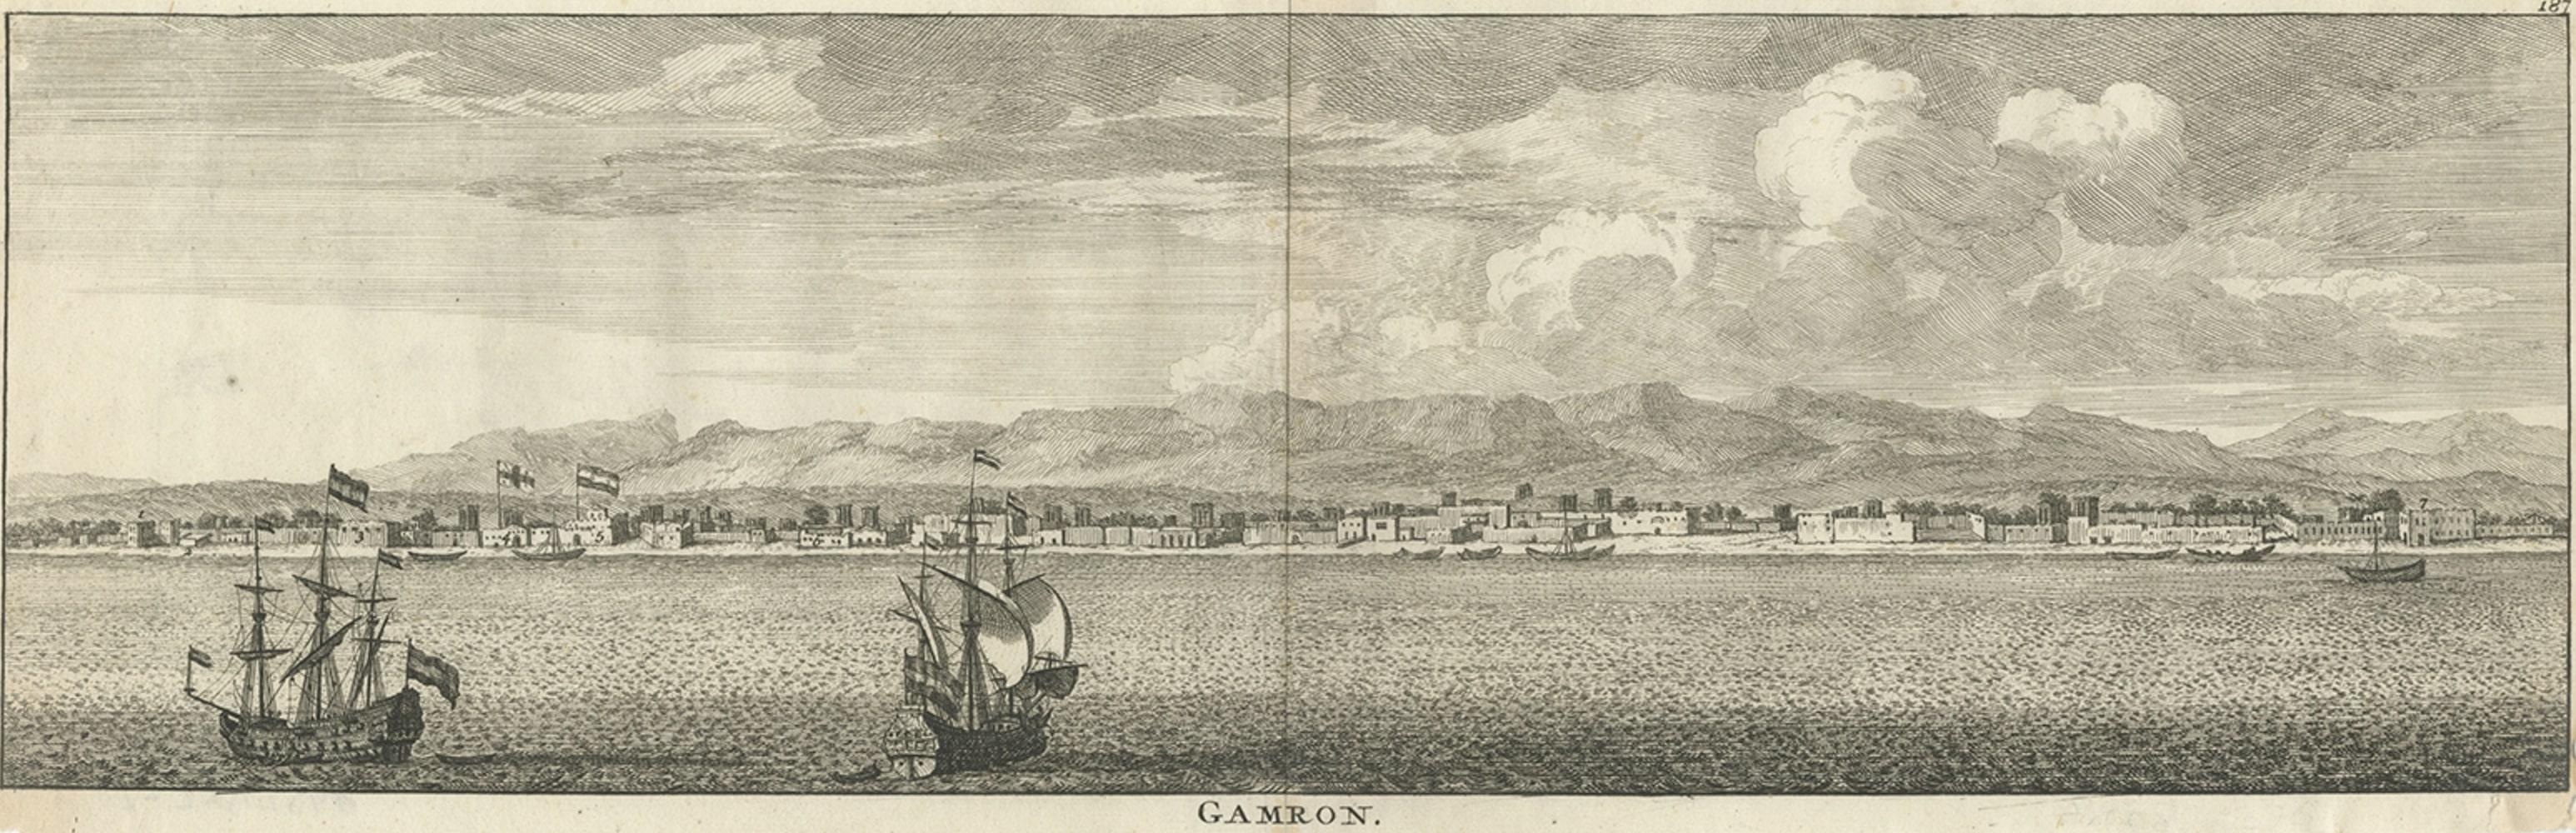 Antique print titled 'Gamron'. Panoramic view of the city of Bandar-Abbas (formerly Gamron) in Iran / Persia. This print originates from 'Reizen over Moskovie, door Persie en Indie' by C. de Bruyn. 

Artists and engravers: Published by R. en G.